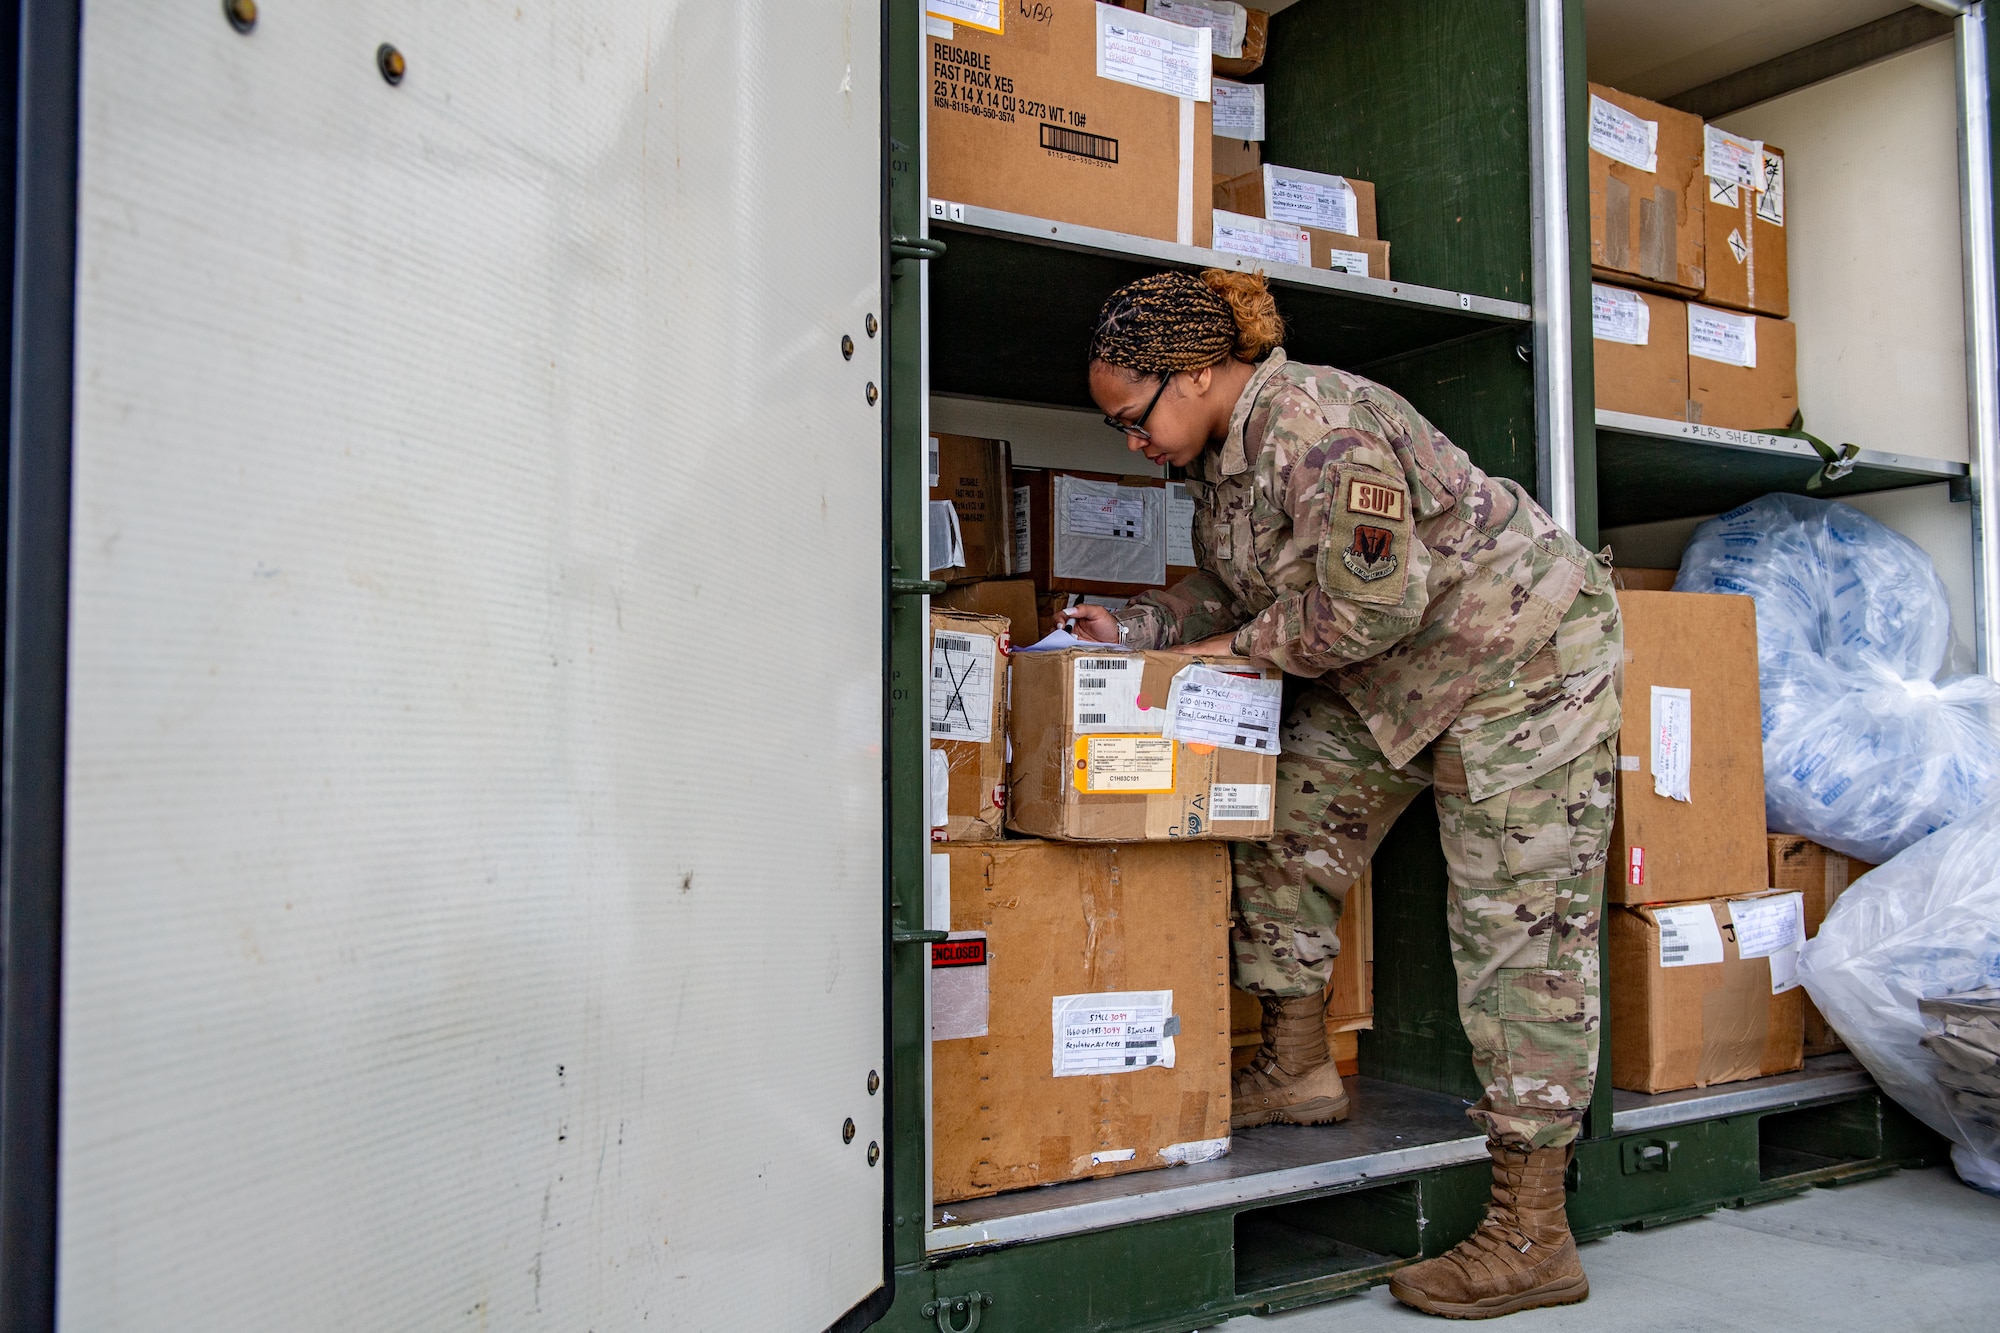 U.S. Air Force Senior Airman Syana Rea, 23rd Logistics Readiness Squadron decentralized material support journeyman, inventories an internal slingable unit (ISU90 kit) during Exercise Ready Tiger 24-1 in Savannah, Georgia, April 9, 2024. Built upon Air Combat Command's directive to assert air power in contested environments, Exercise Ready Tiger 24-1 aims to test and enhance the 23rd Wing’s proficiency in executing Lead Wing and Expeditionary Air Base concepts through Agile Combat Employment and command and control operations. (U.S. Air Force photo by Senior Airman Courtney Sebastianelli)